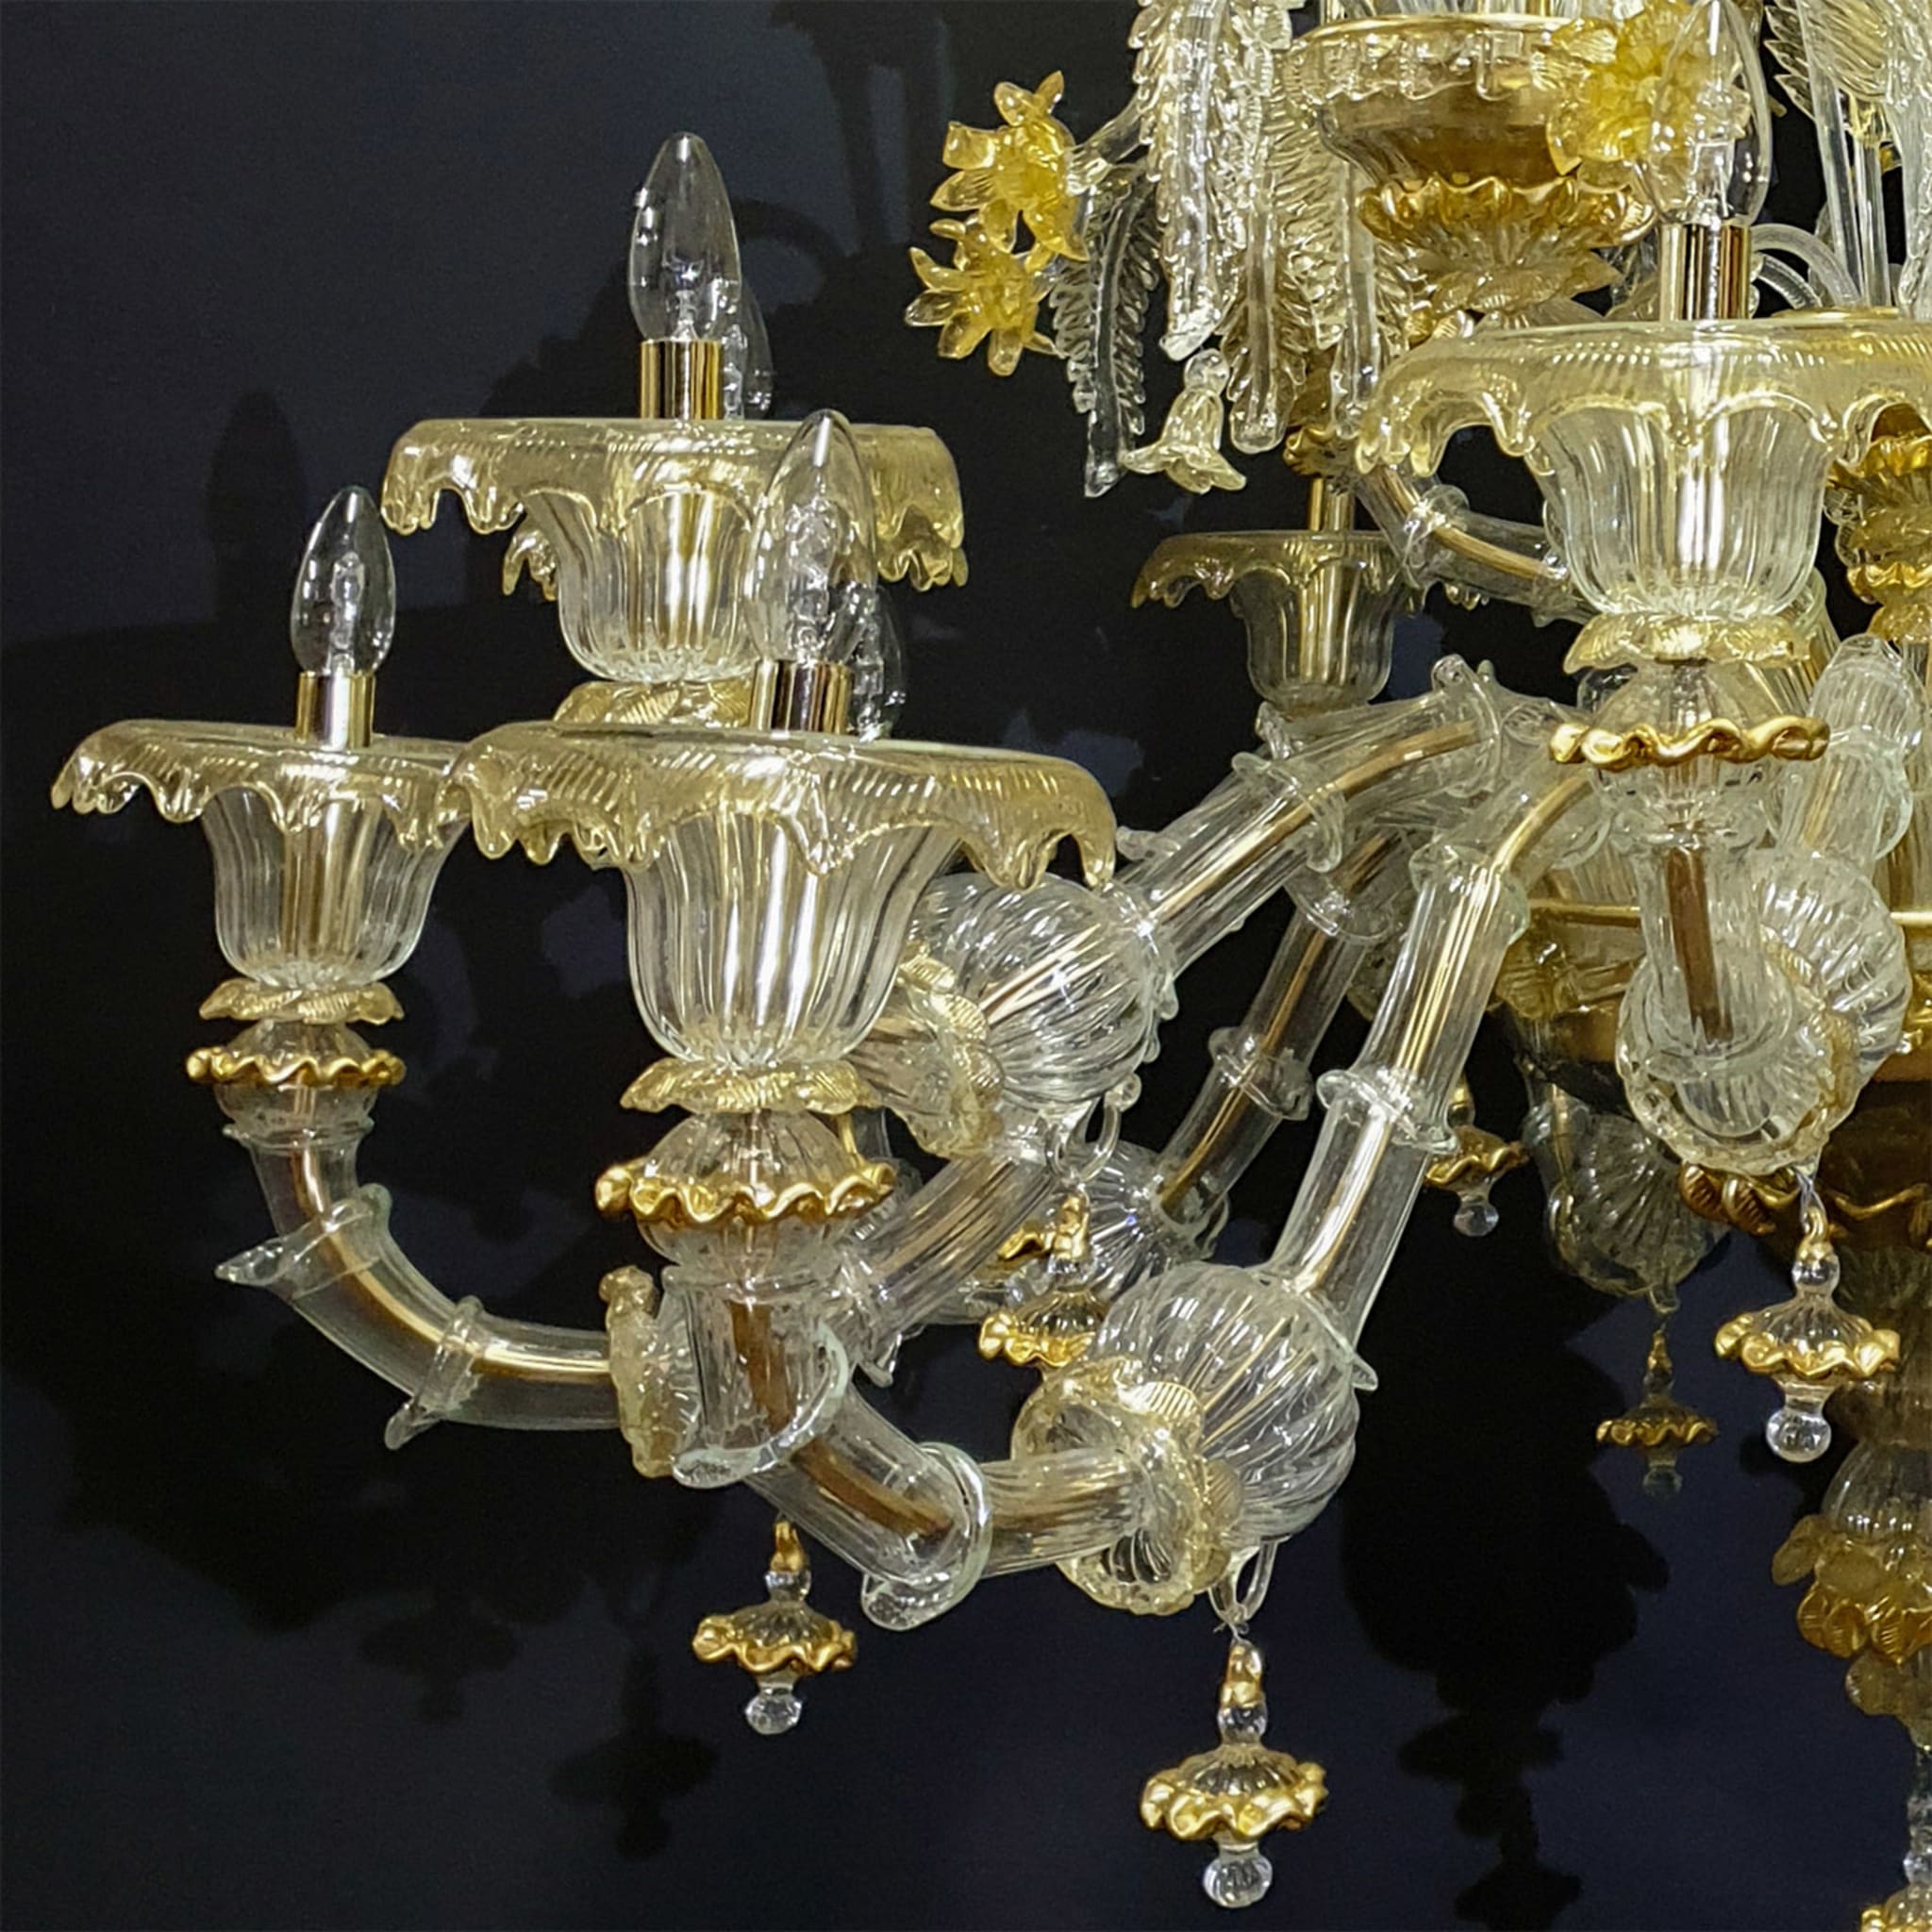 Rezzonico-style Gold and Crystal Chandelier #3 - Alternative view 2